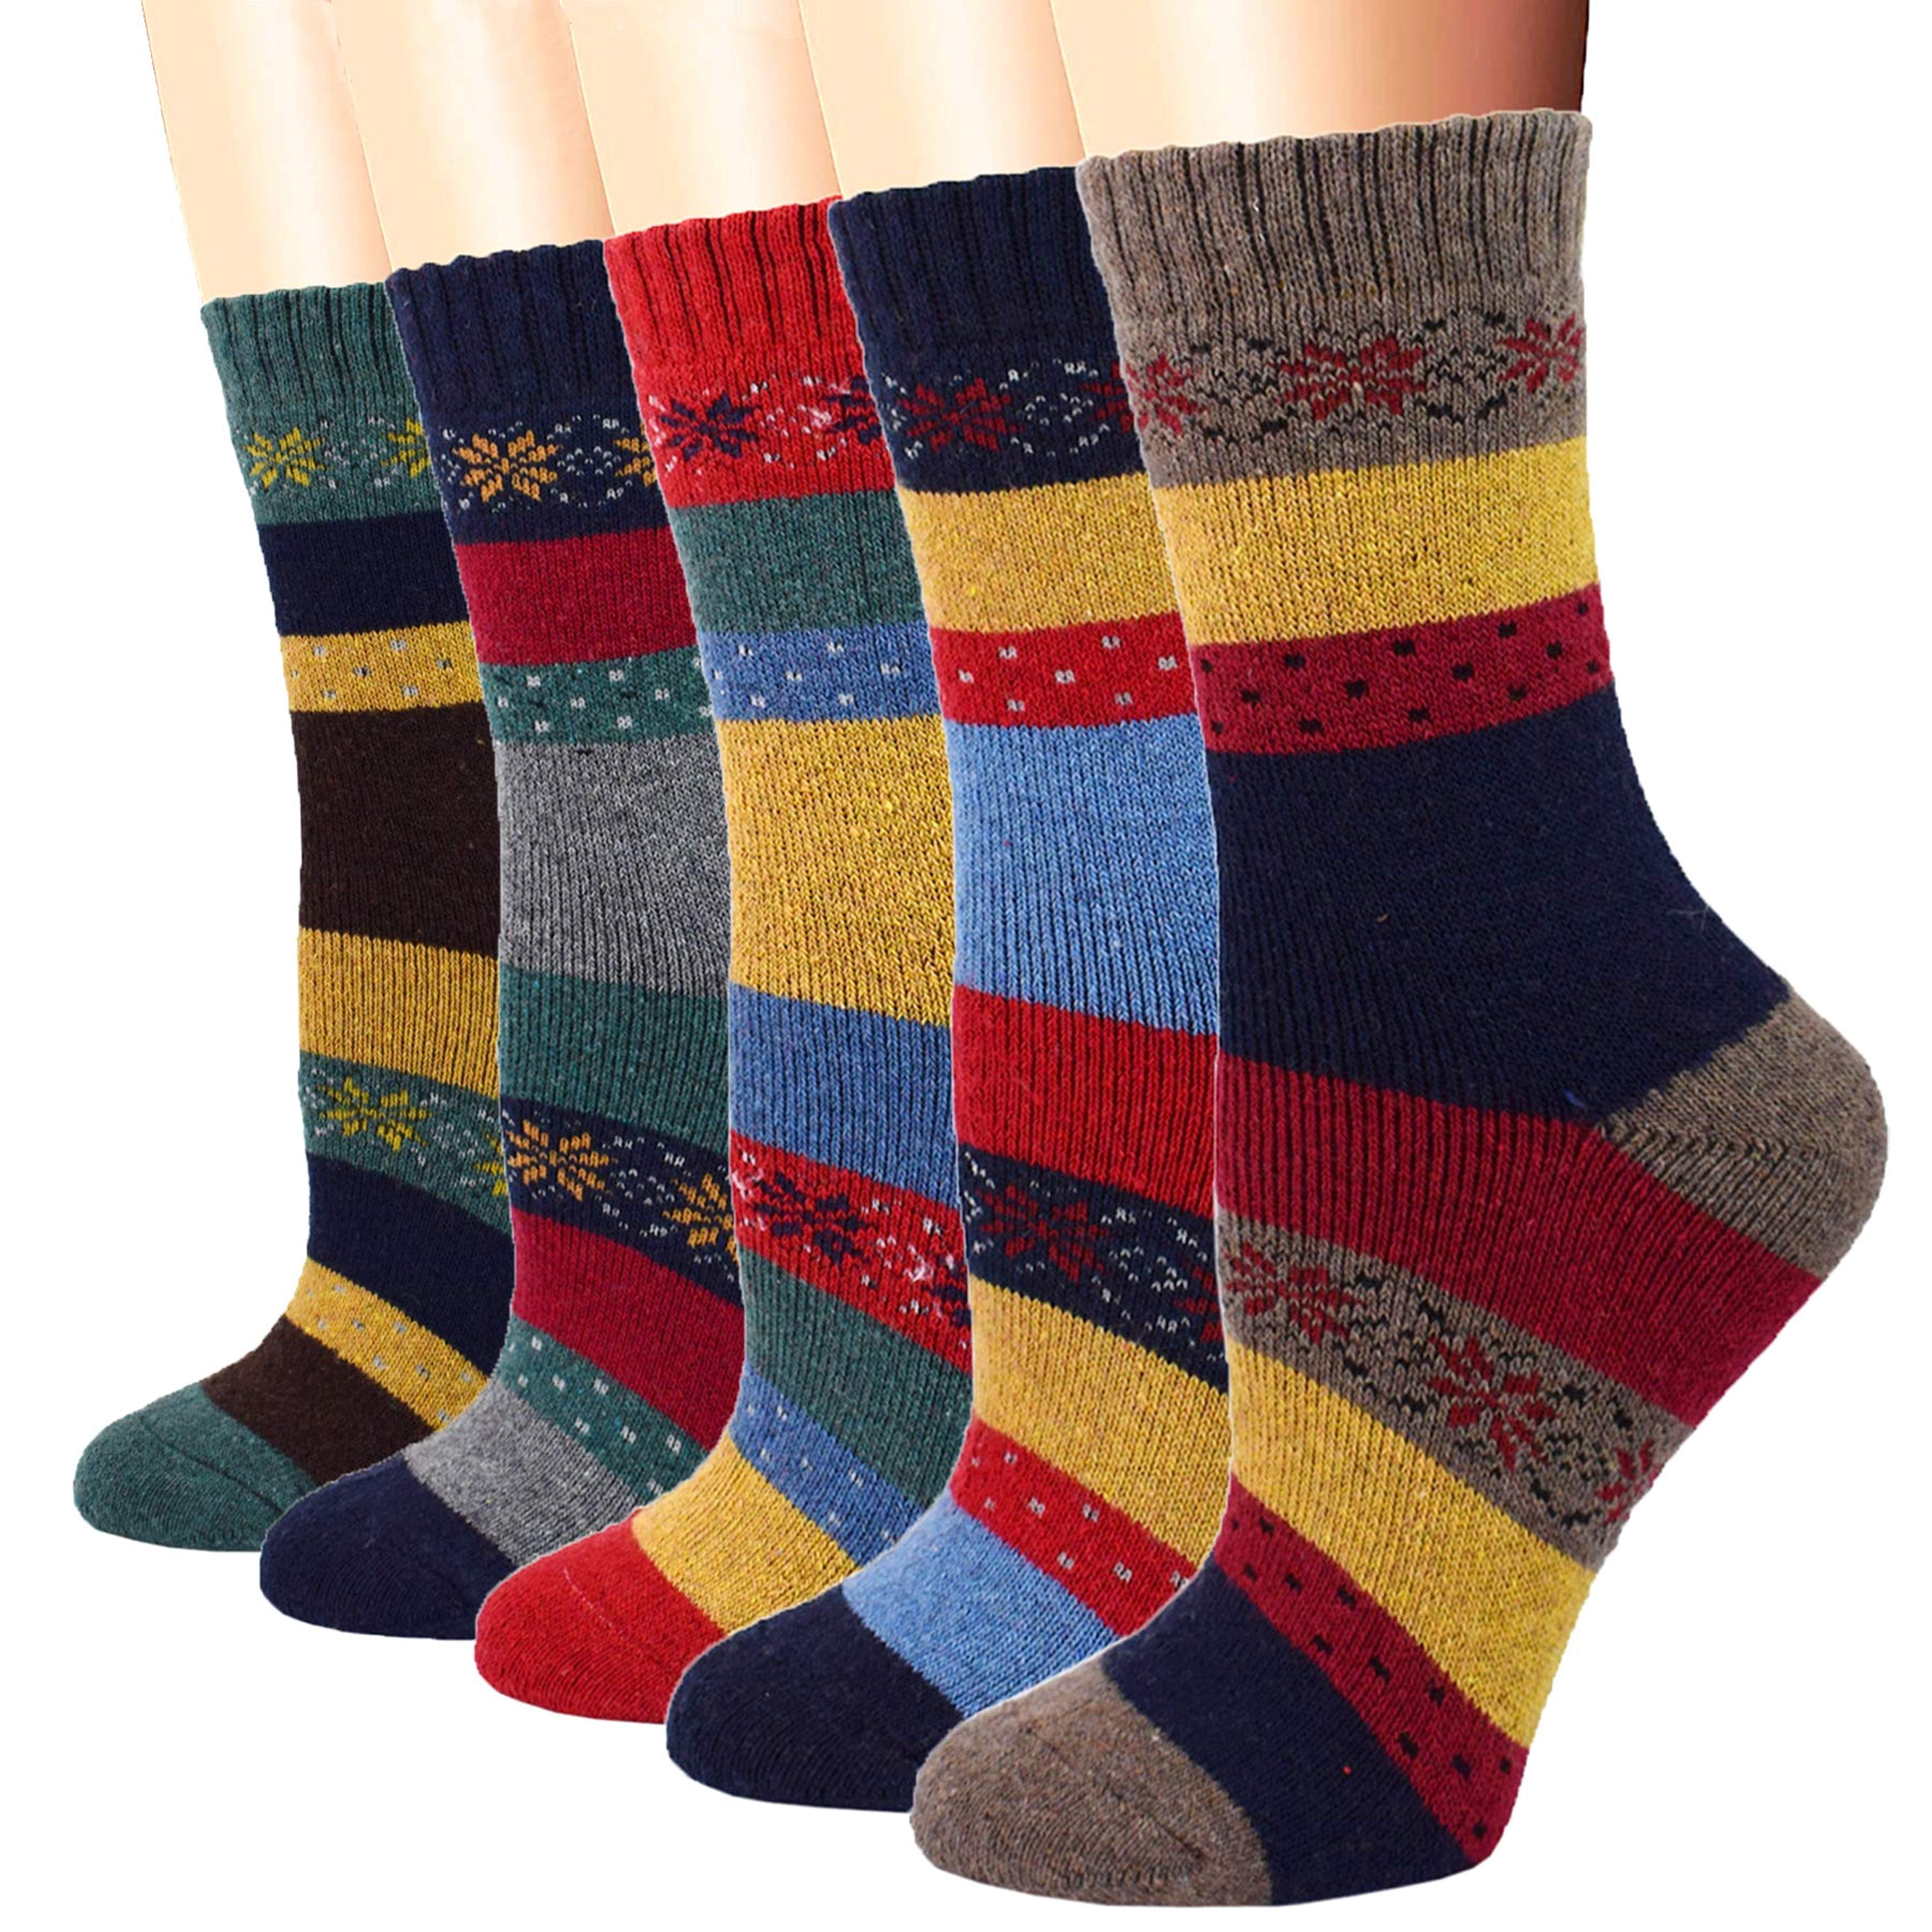 Details about   5 Pairs Womens Winter Socks Vintage Soft Cozy Warm Thick Knit Wool Crew Socks 